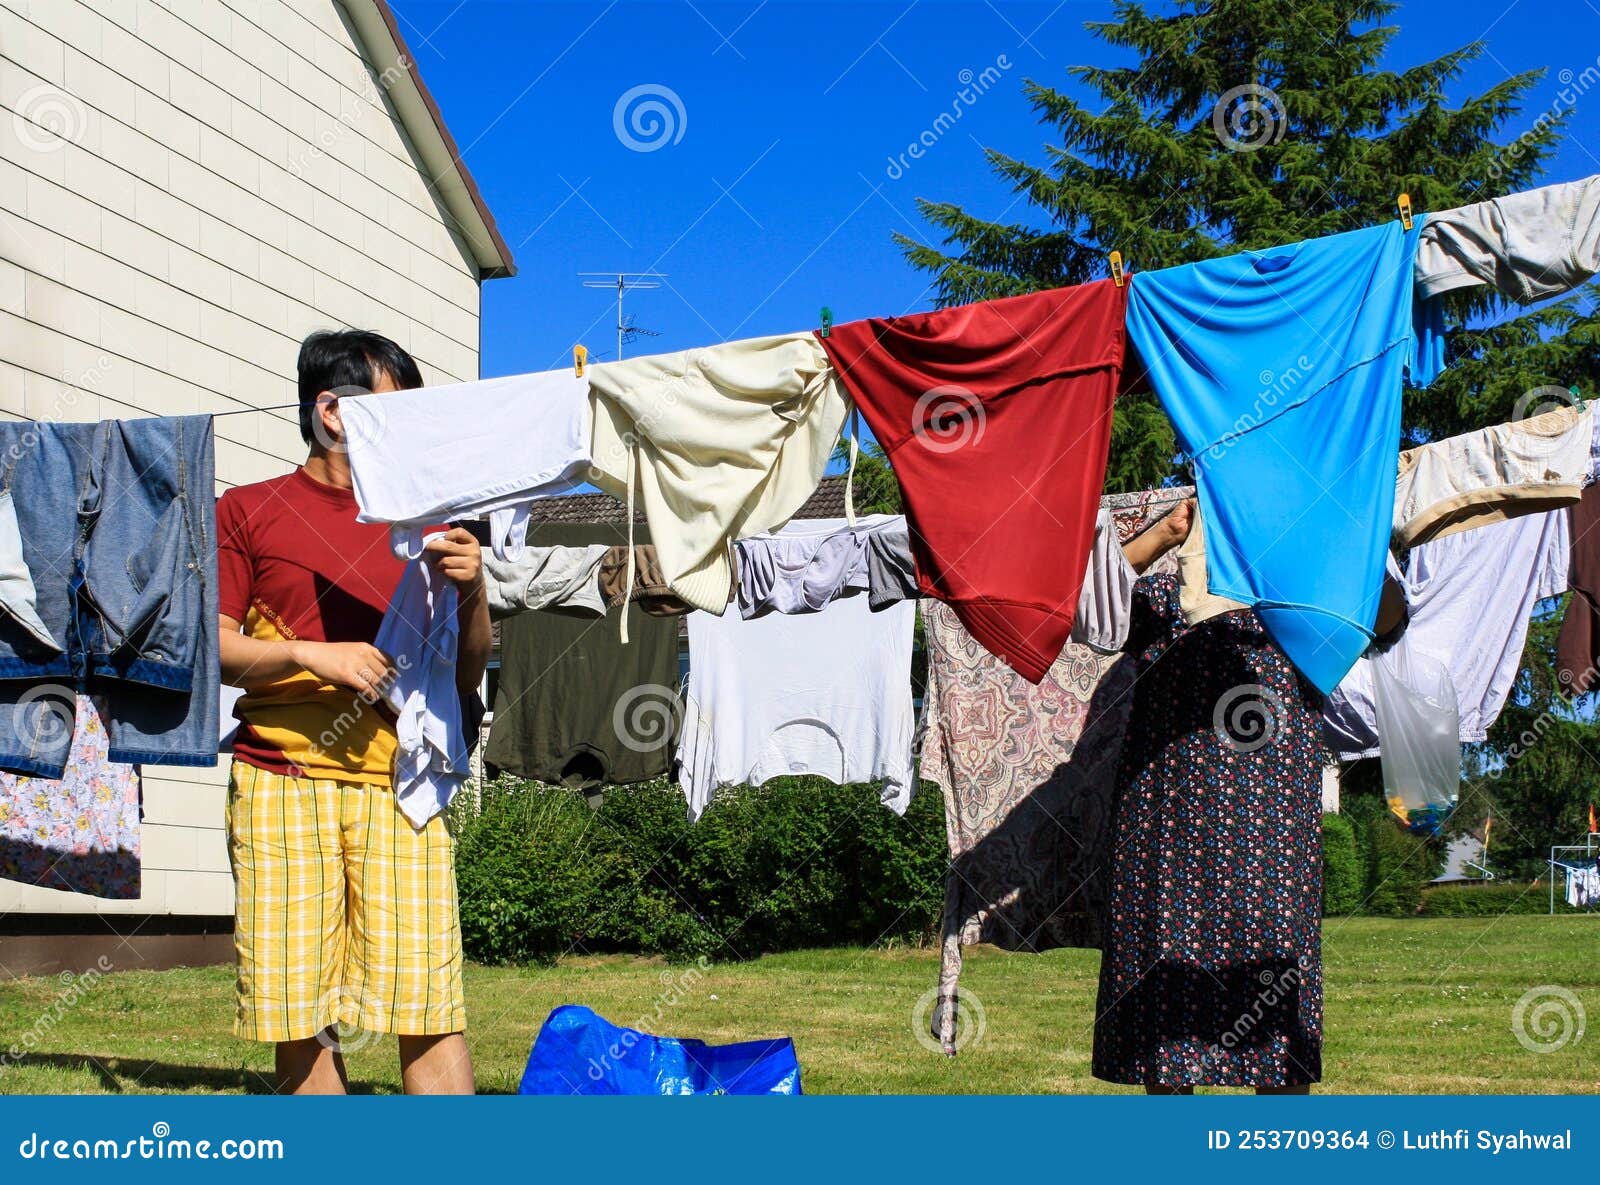 View of People Hanging Laundry on Clothesline in Backyard Stock Photo -  Image of family, fresh: 253709364